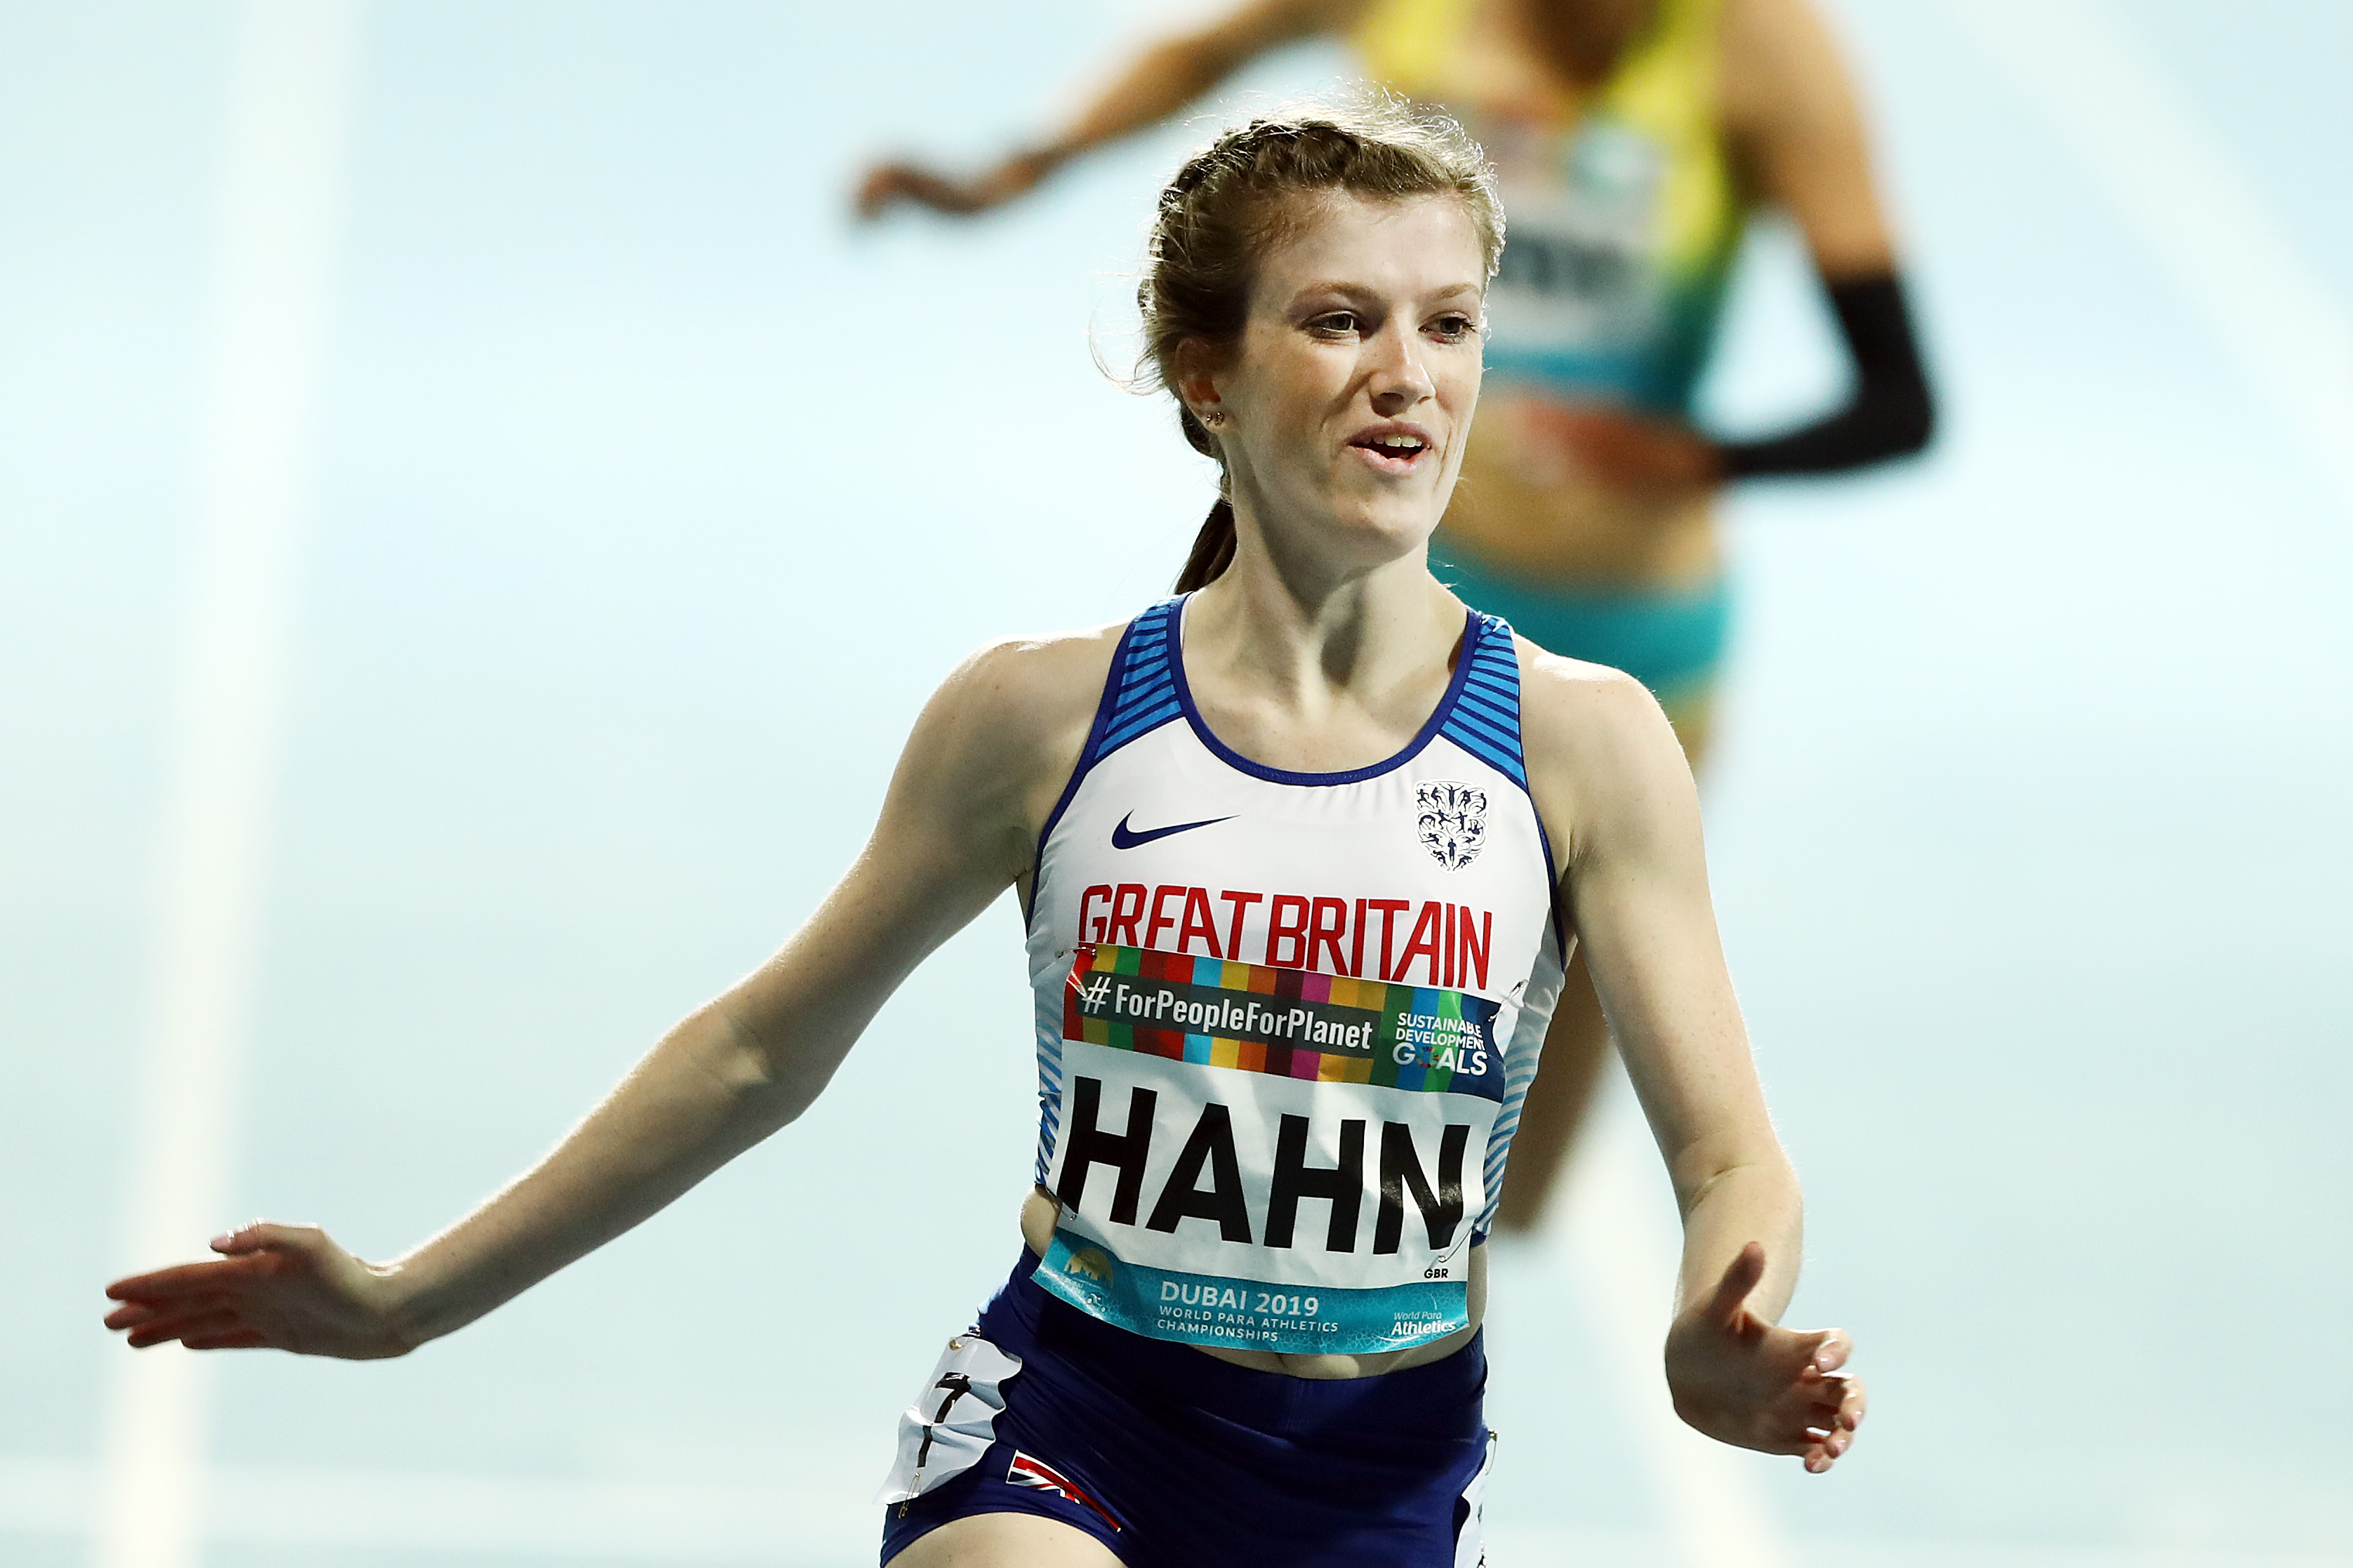 PERFECTION FROM HAHN AS SHE RETAINS GLOBAL TITLE WITH WORLD RECORD IN DUBAI